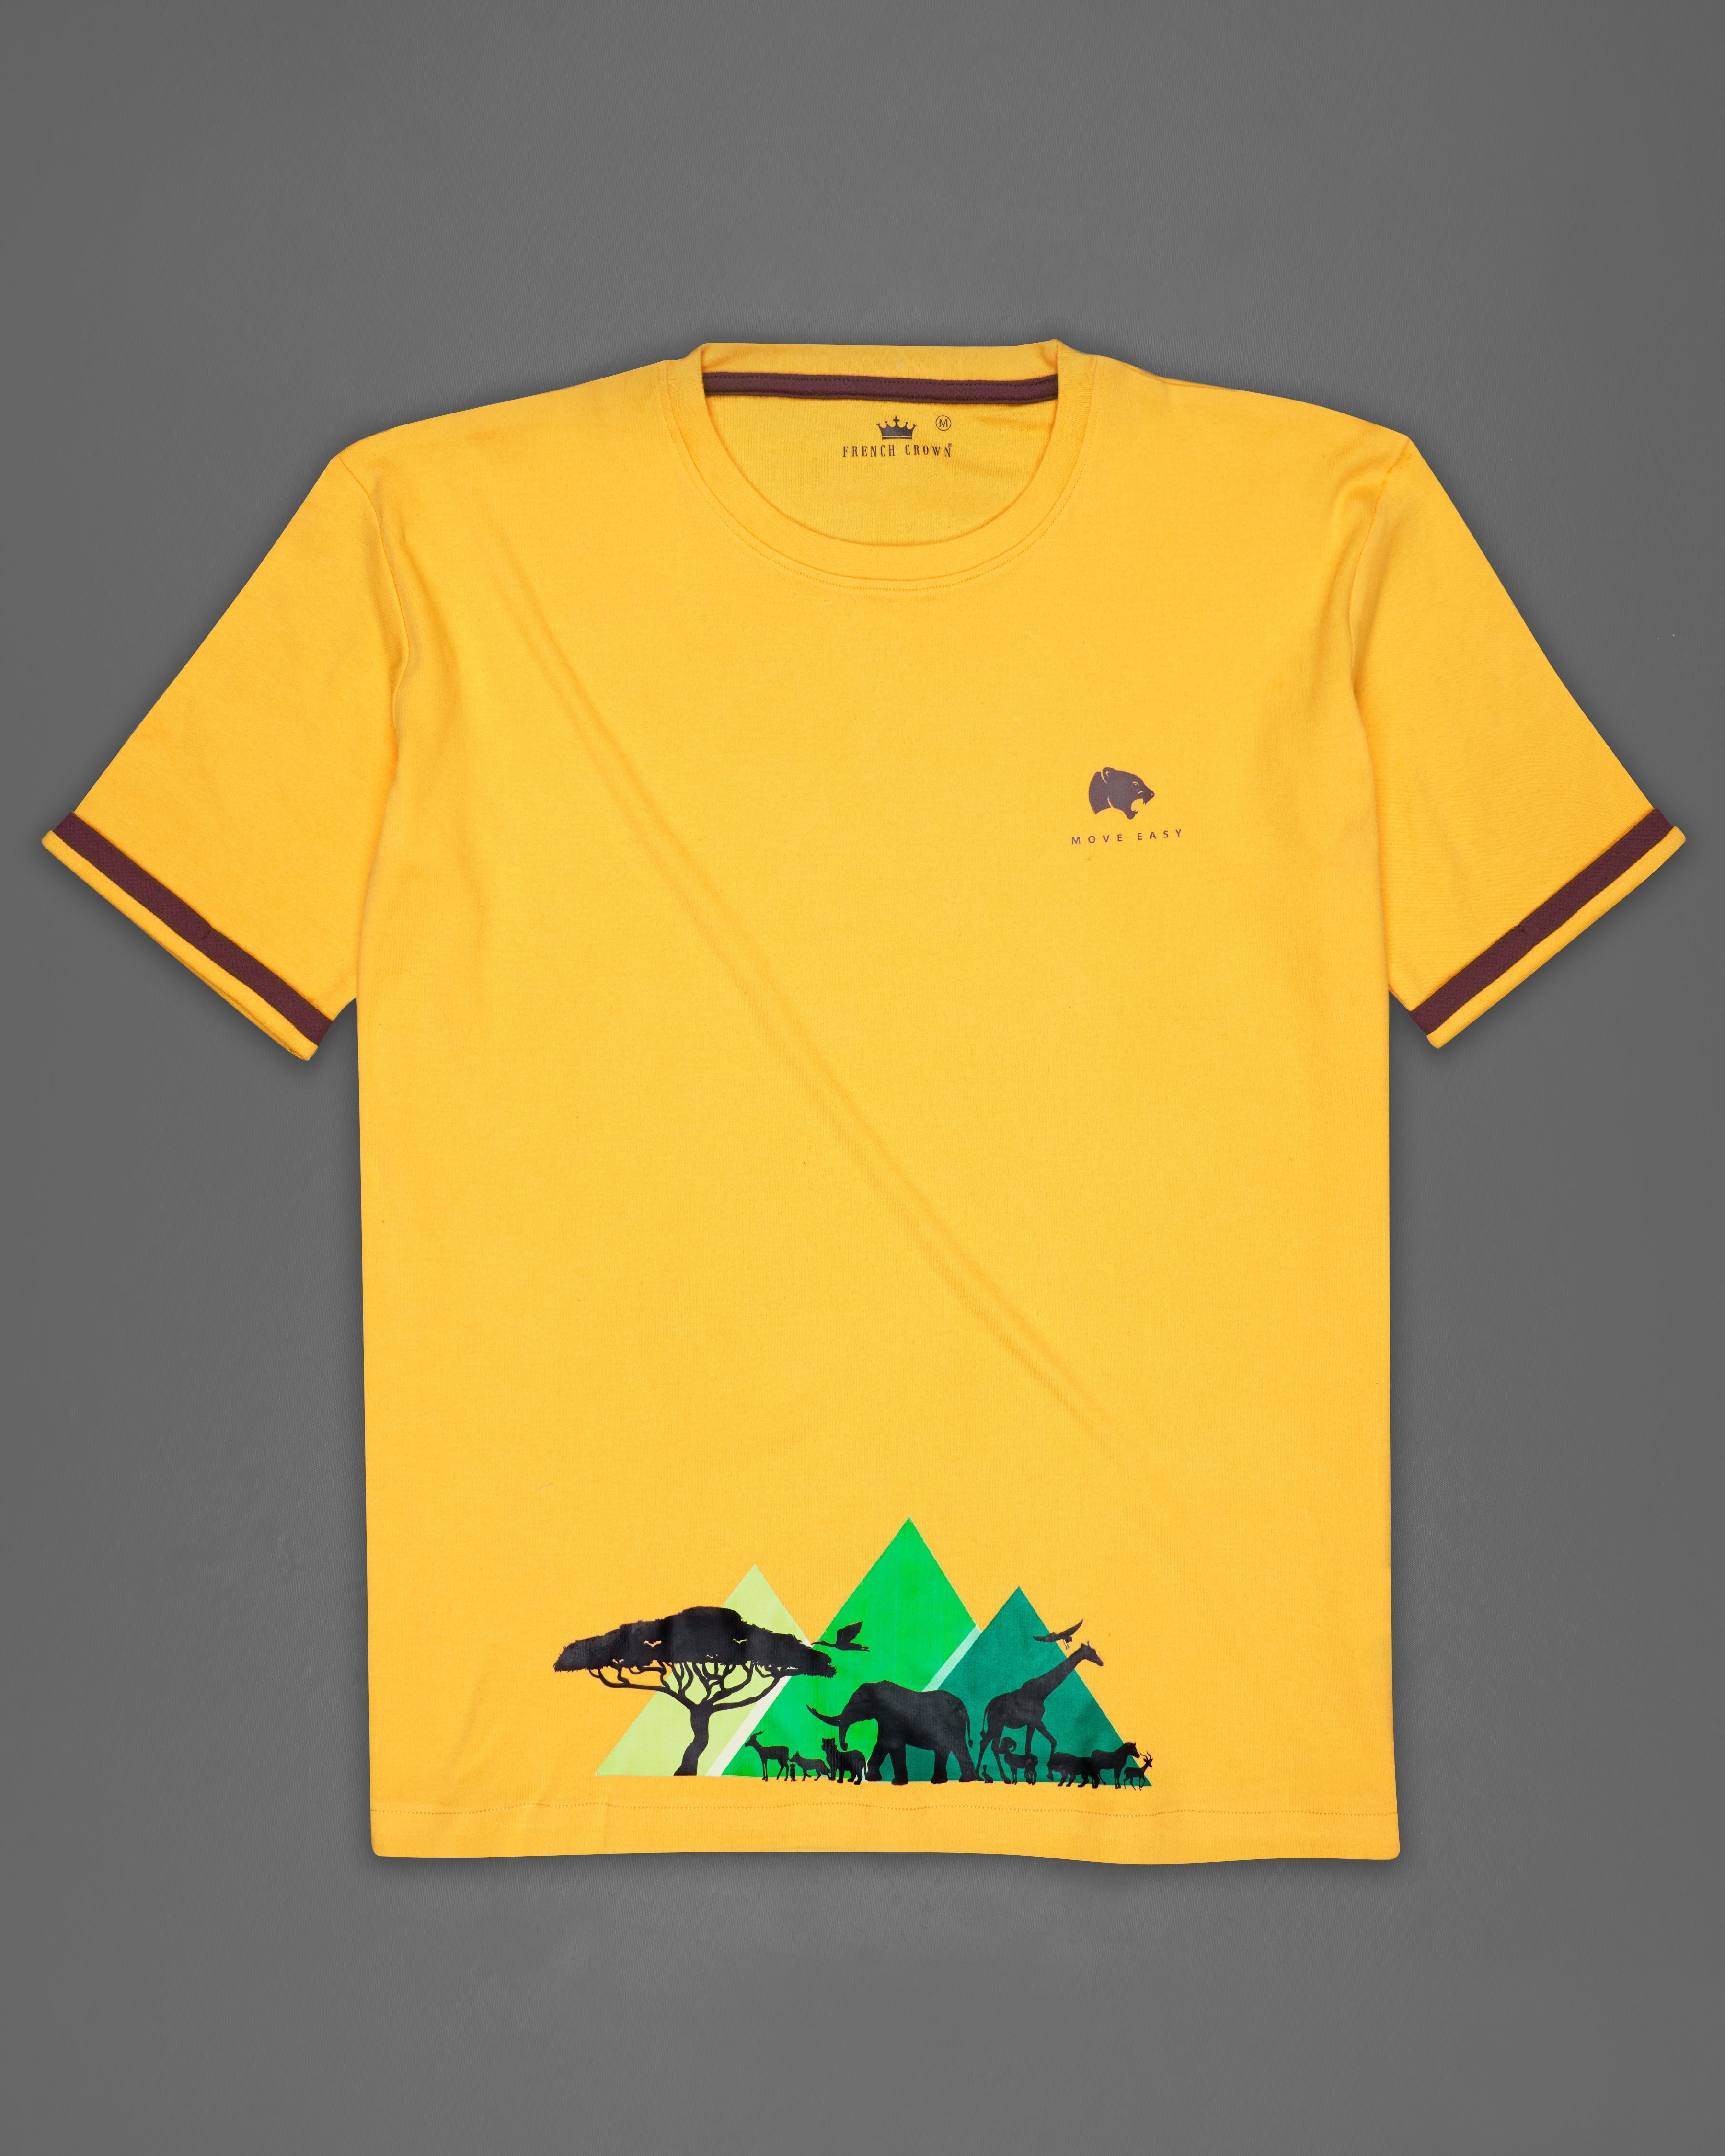 Sunglow Yellow Tropical Rubber Printed Premium Cotton T-Shirt TS410-W01-S, TS410-W01-M, TS410-W01-L, TS410-W01-XL, TS410-W01-XXL